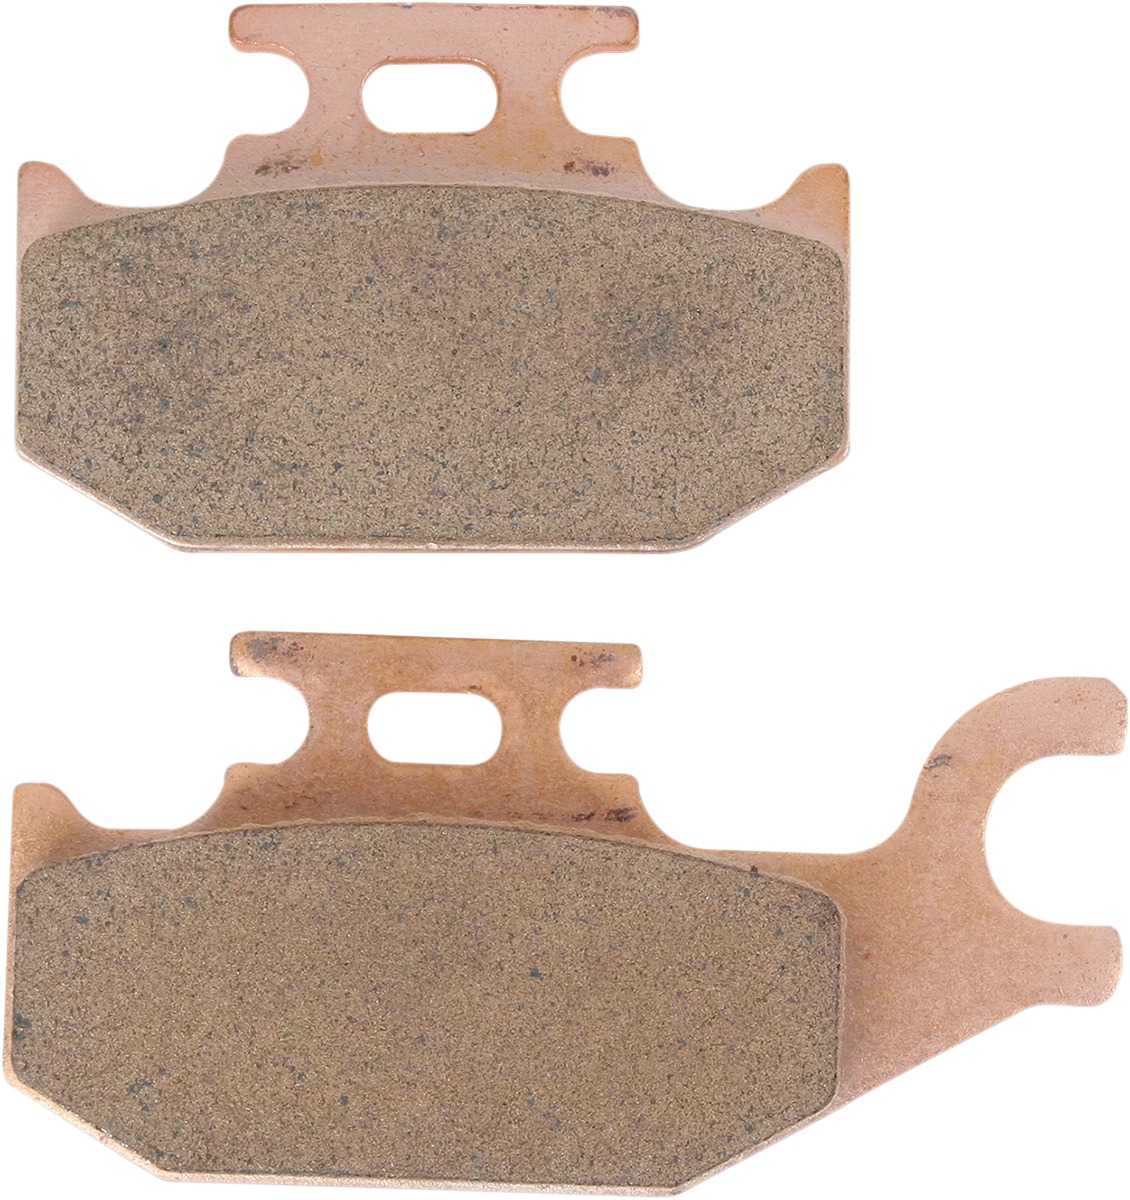 Severe Duty Brake Pads - Click Image to Close